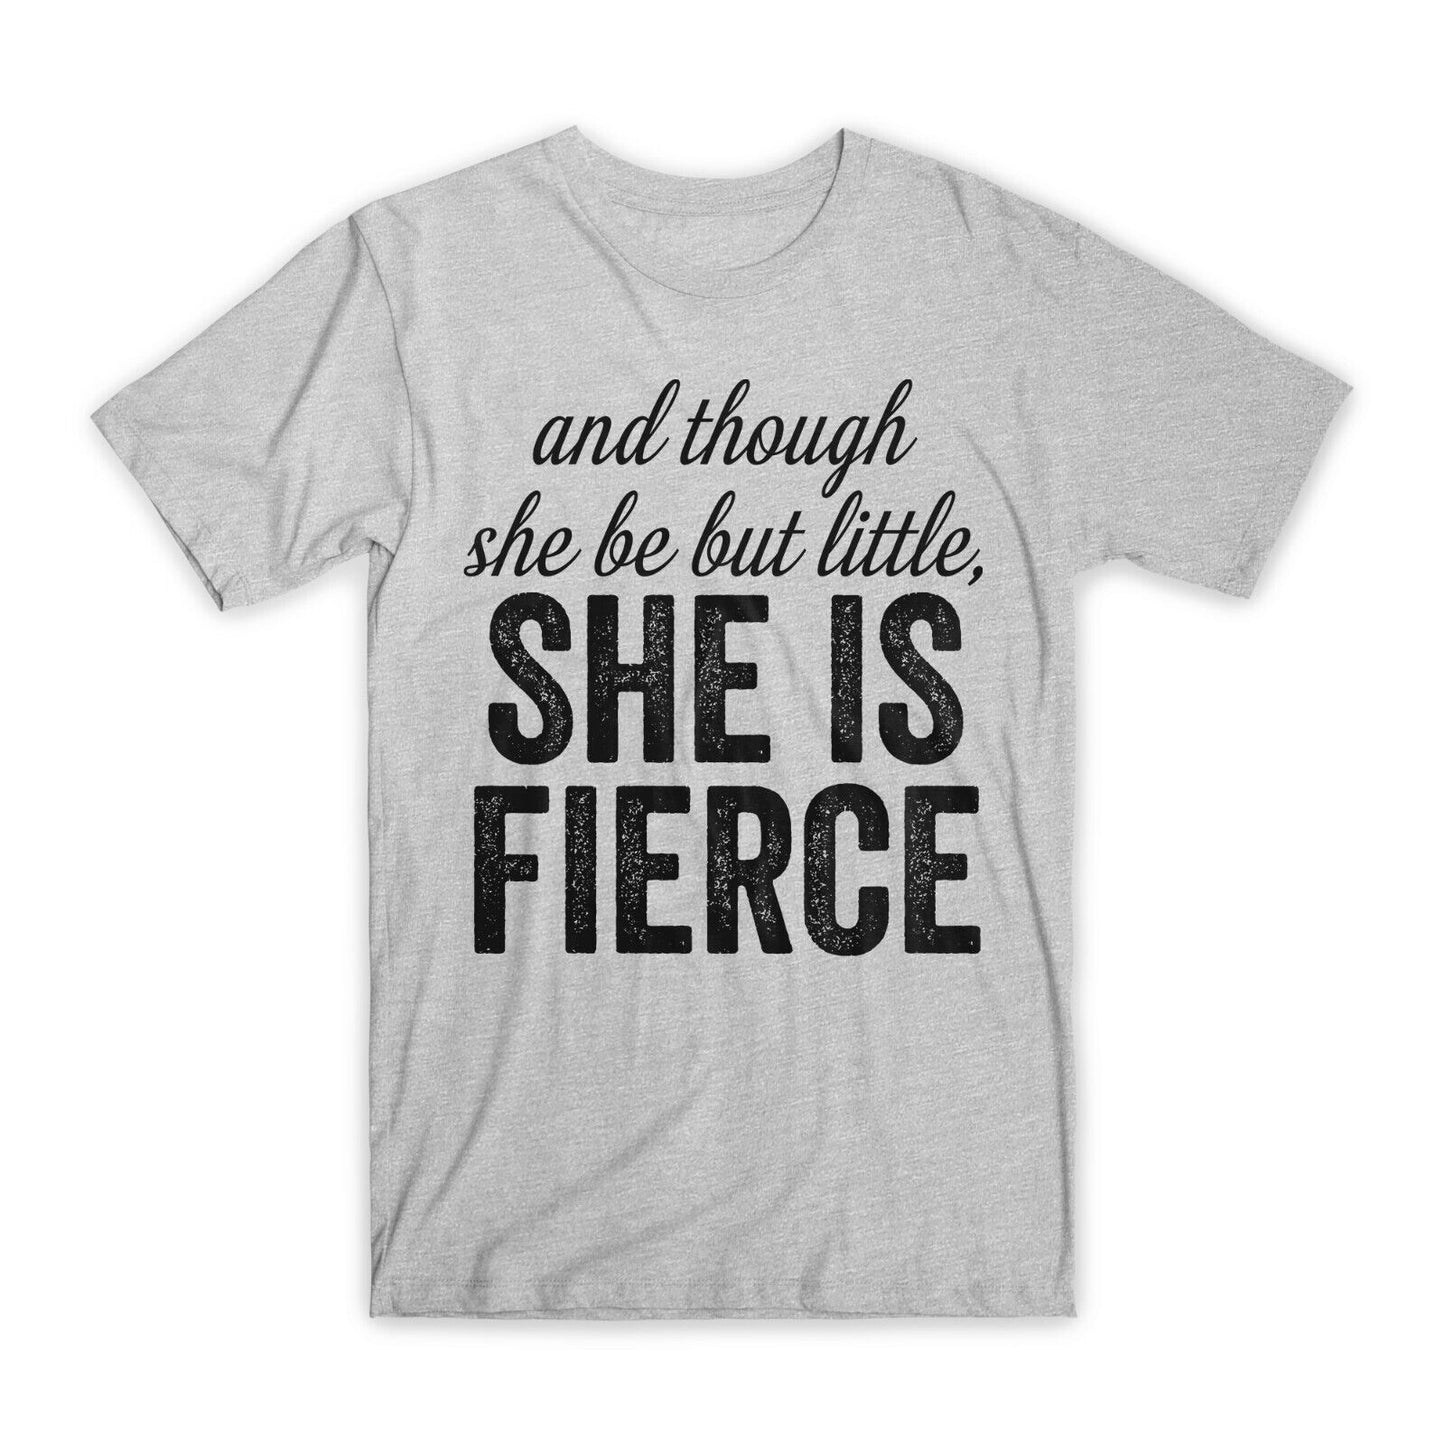 And Though She Be But Little, She is Fierce T-Shirt Premium Cotton Funny T NEW